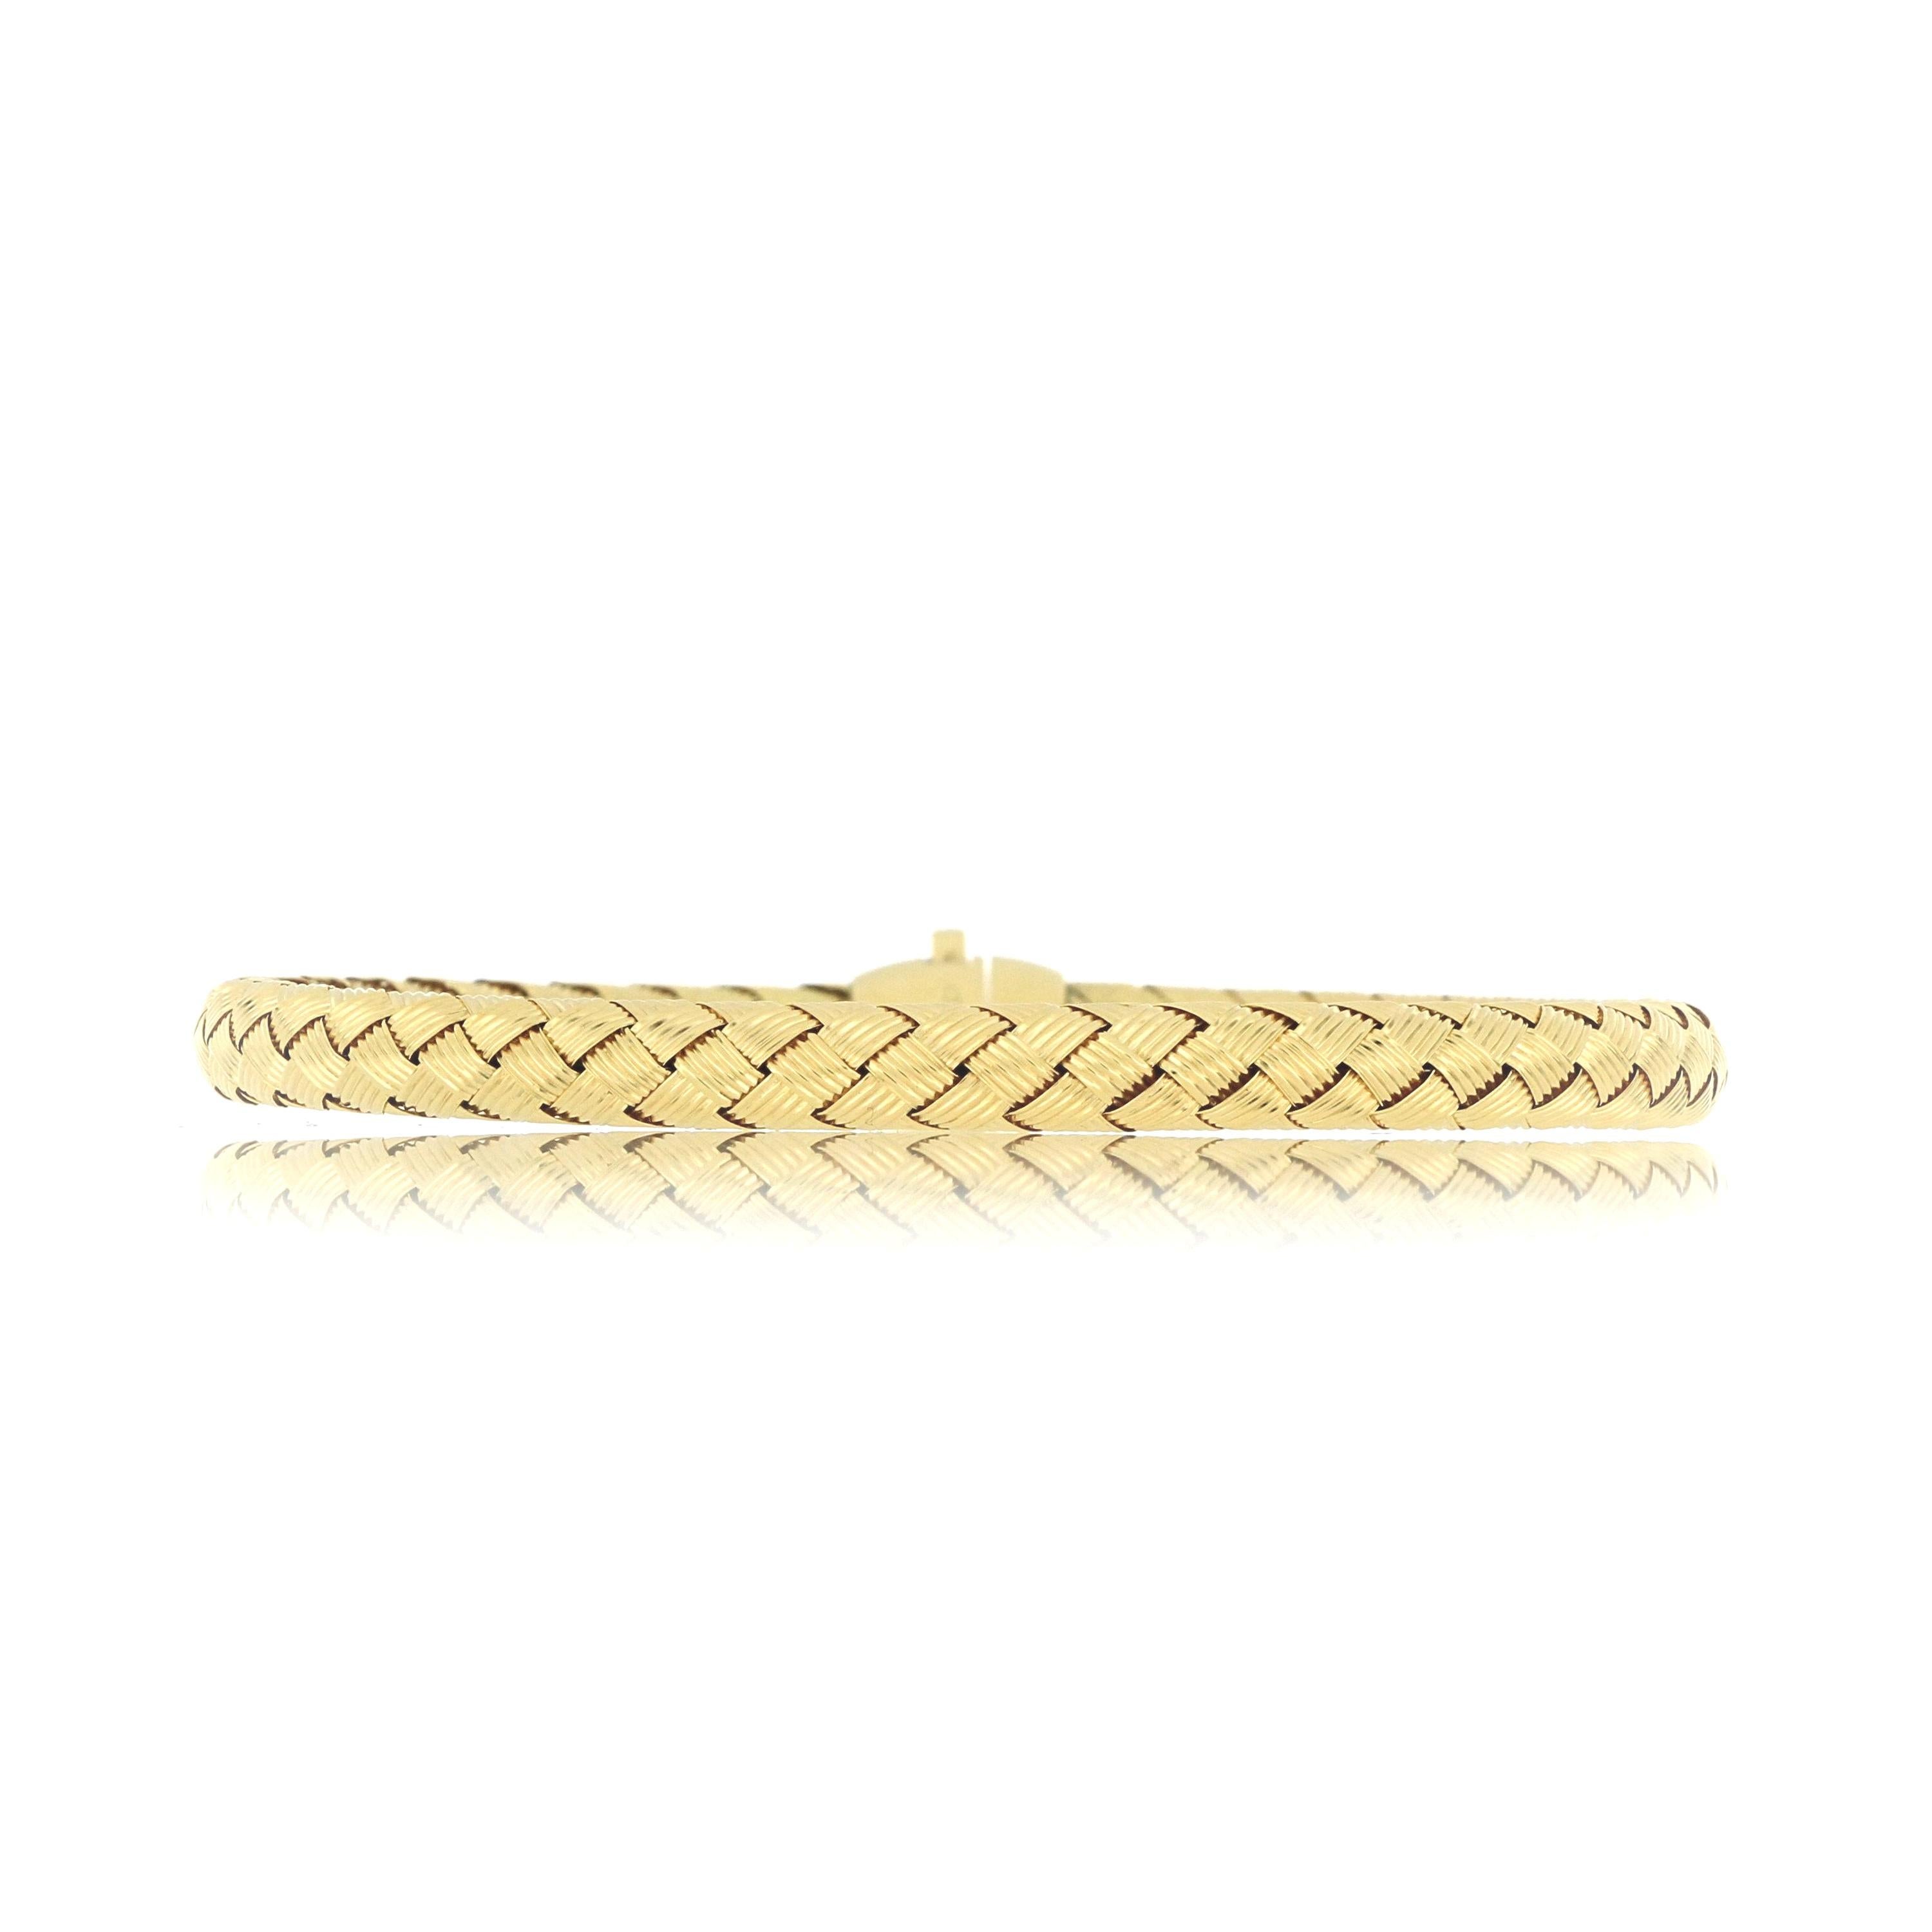 18 Karat Gold Bangle, Italian made with fabulous craftsmanship, fashionable and unique.
O’Che 1867 was founded one and a half centuries ago in Macau. The brand is renowned for its high jewellery collections with fabulous designs. Our designs reflect